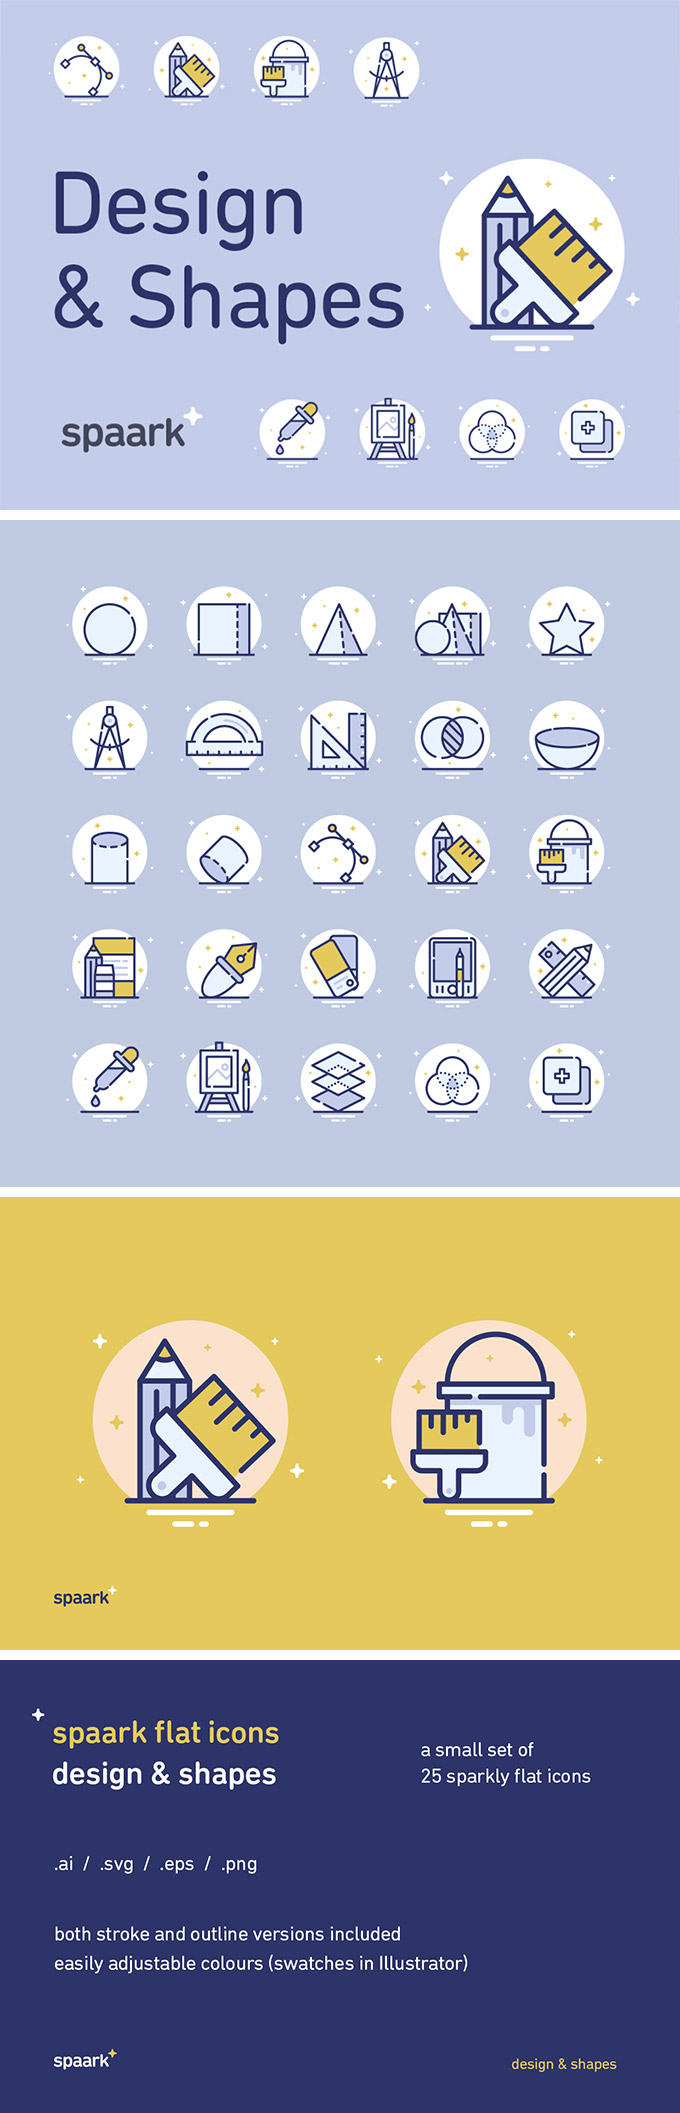 freebie-25-design-and-shapes-icons-01